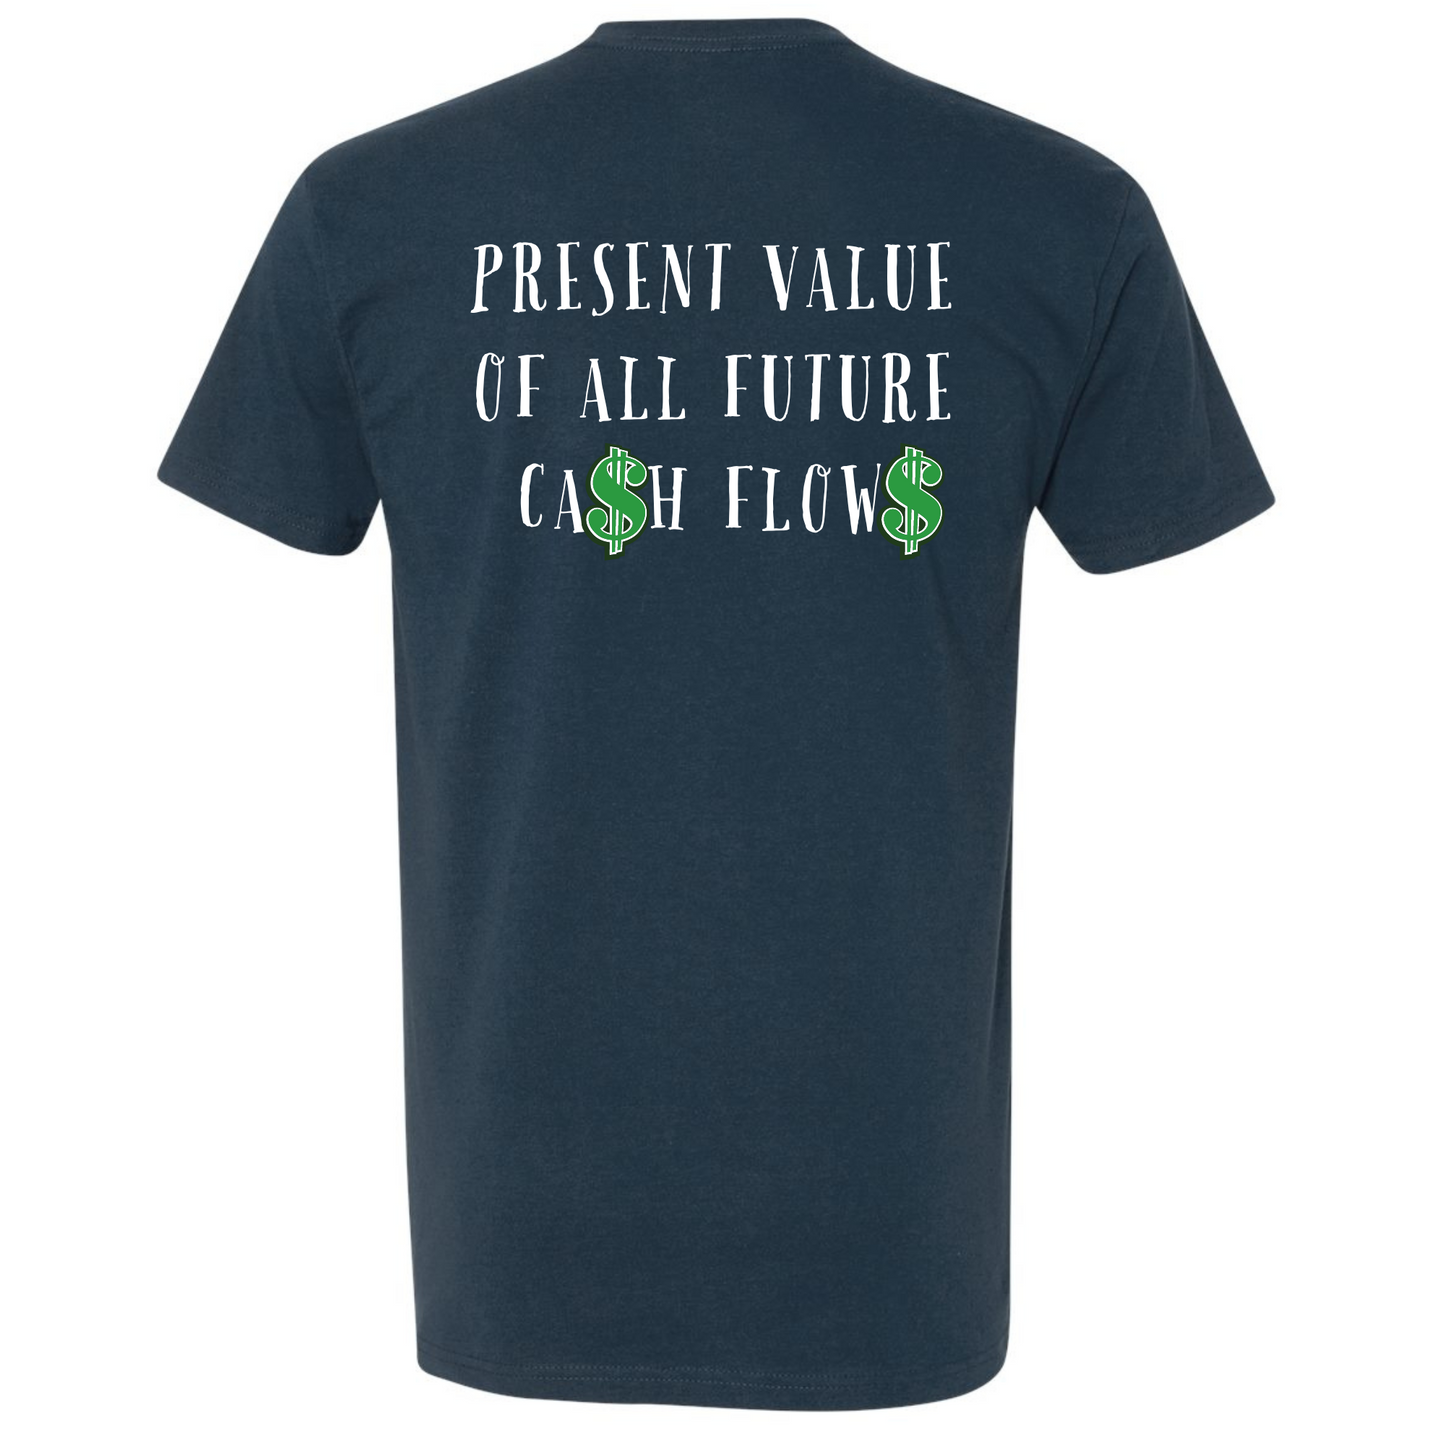 Everything Money "Paul's Favorite Saying" Fitted Crew T-Shirt by Next Level